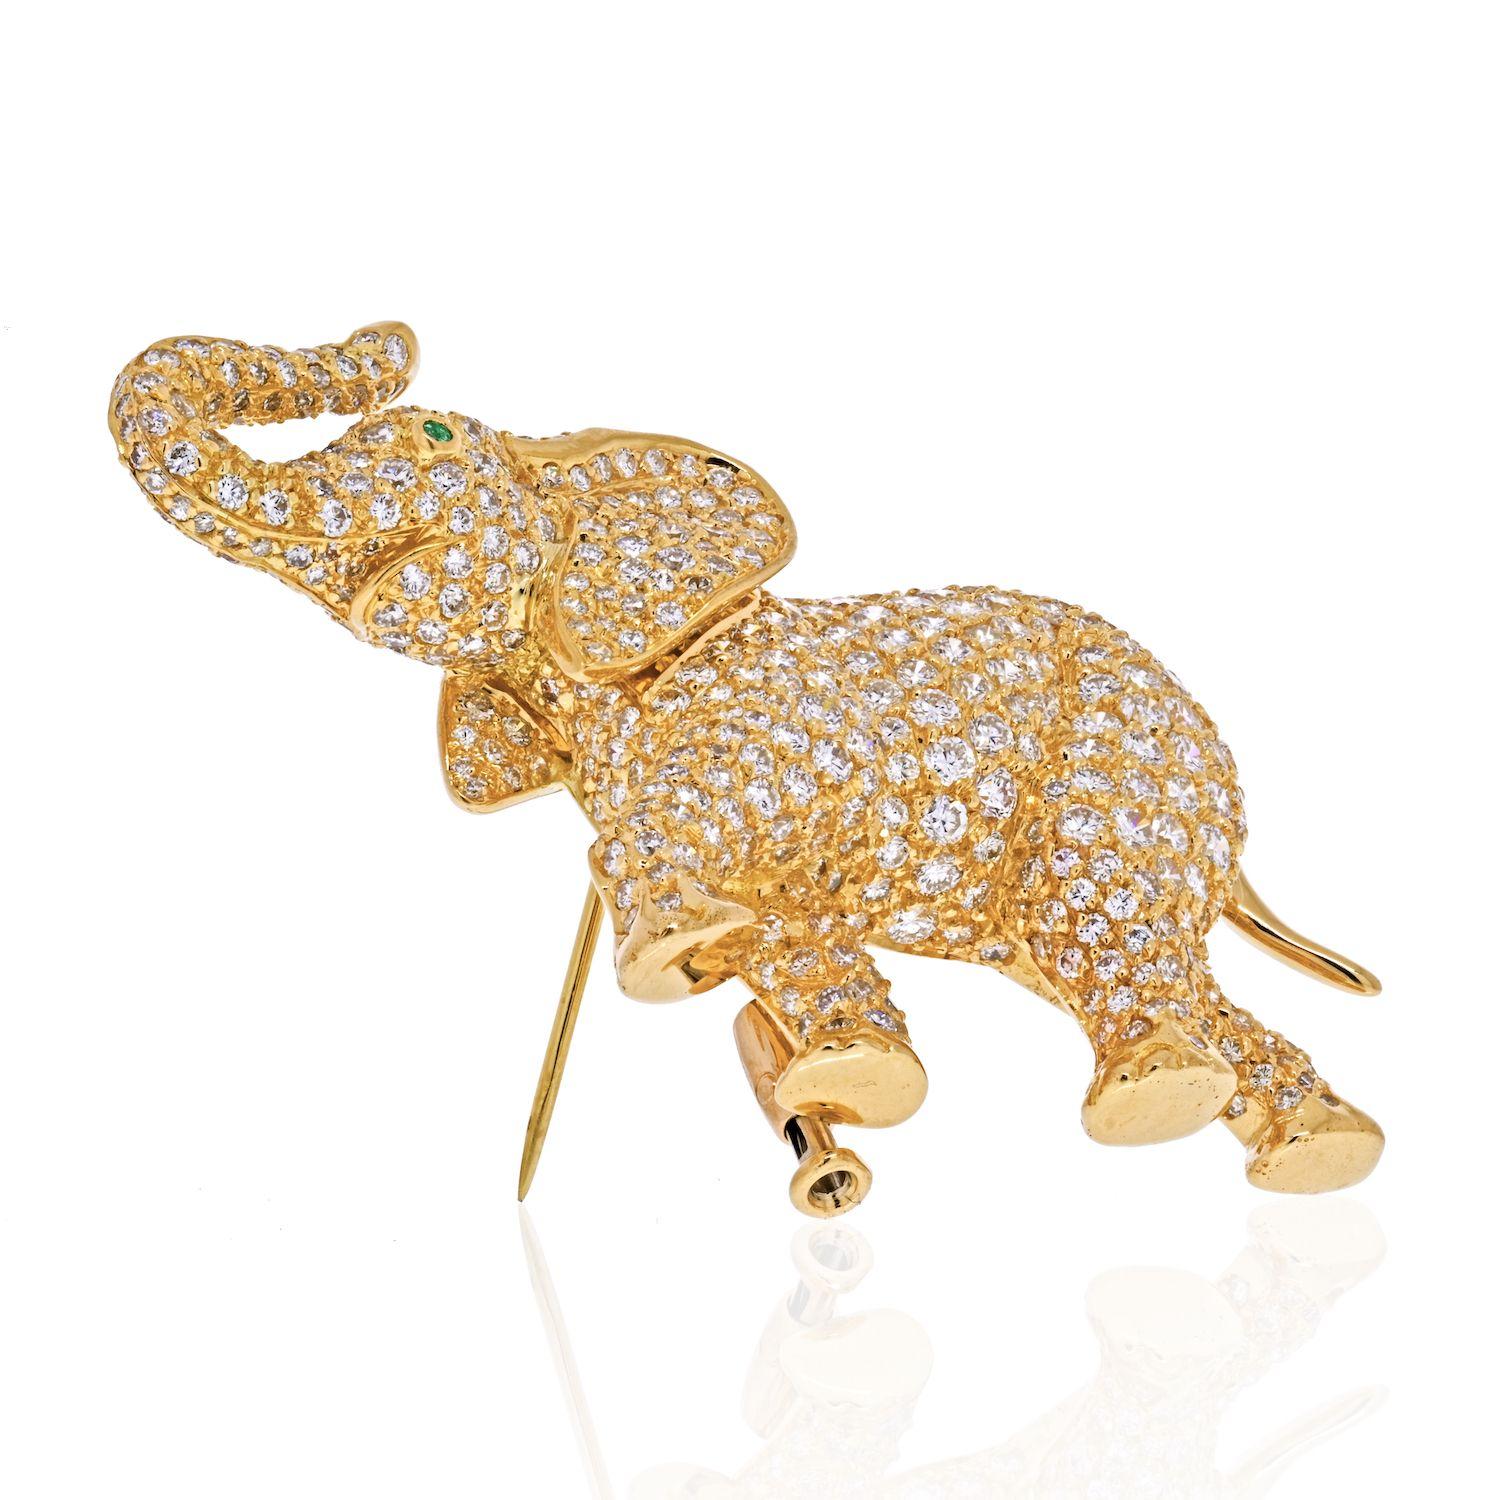 Cartier 18K Yellow Gold Diamond Elephant Brooch.
Crafted in 18K yellow gold mounted with round cut pave diamonds of E-F color VVS-VS clarity, approx. 3 carats in diamond weight. 
The brooch is fastened by a single pin. 
Measurements of the brooch